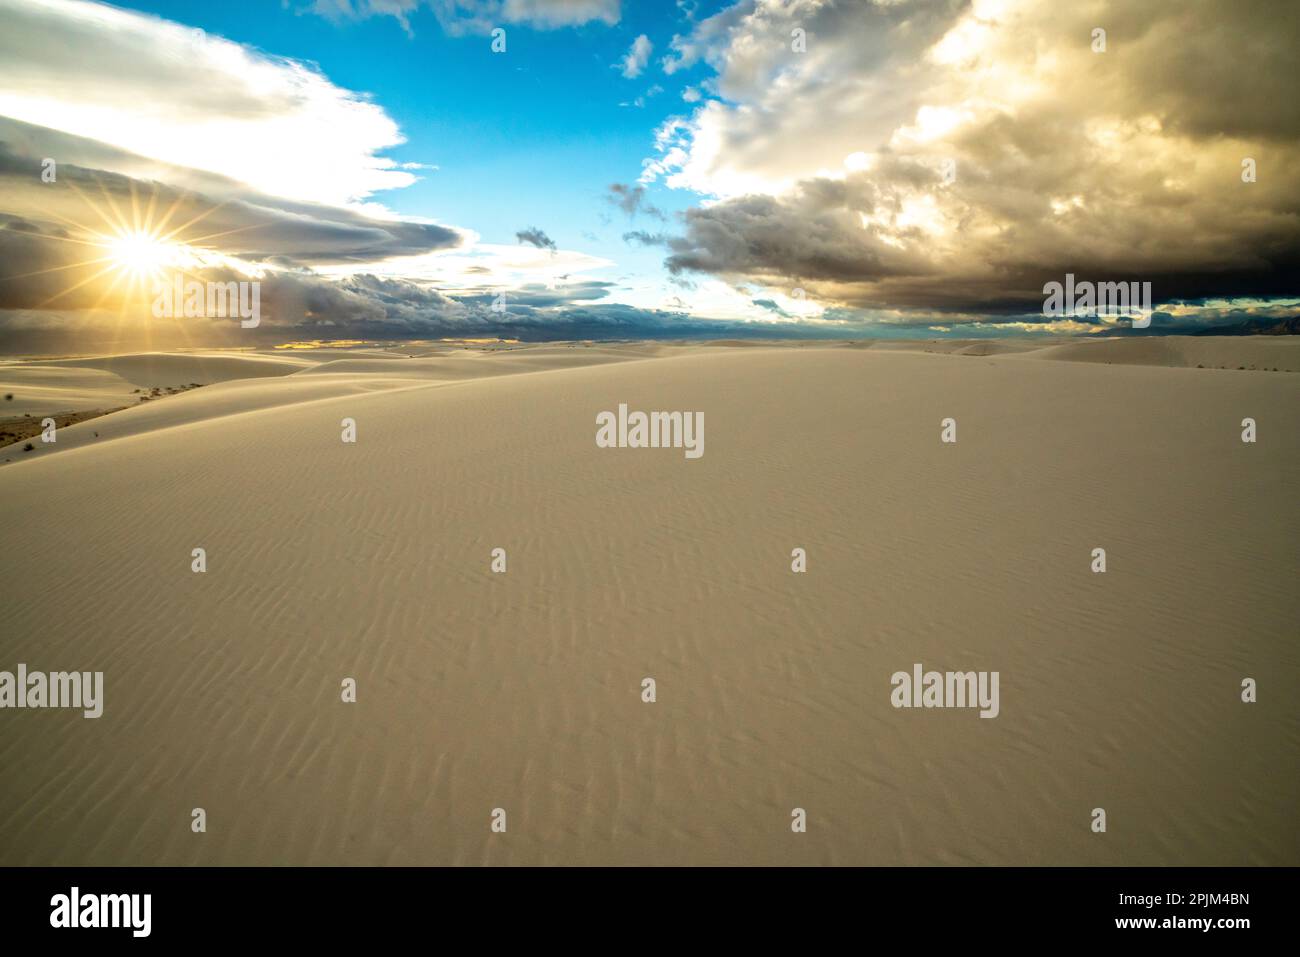 USA, New Mexico, White Sands National Monument. Sunrise clouds over white desert sand. Stock Photo